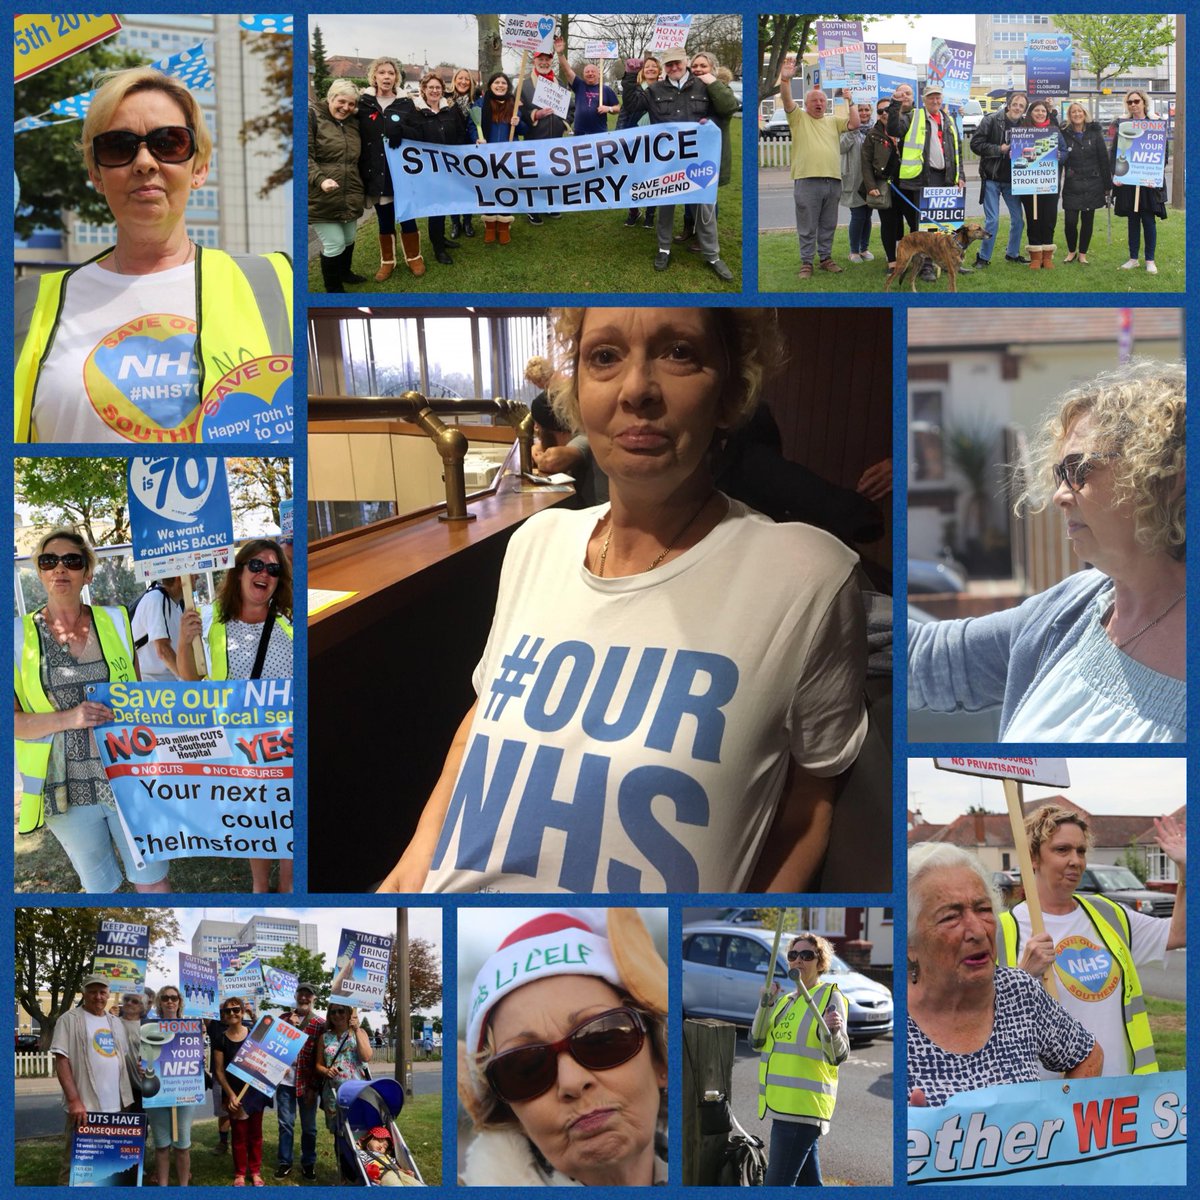 Rest in peace our dear, loyal, funny, feisty, Save Southend NHS warrior and committee Treasurer Julie. We are gutted. The loss of an amazing campaigner and dear friend. Rest in peace 💔